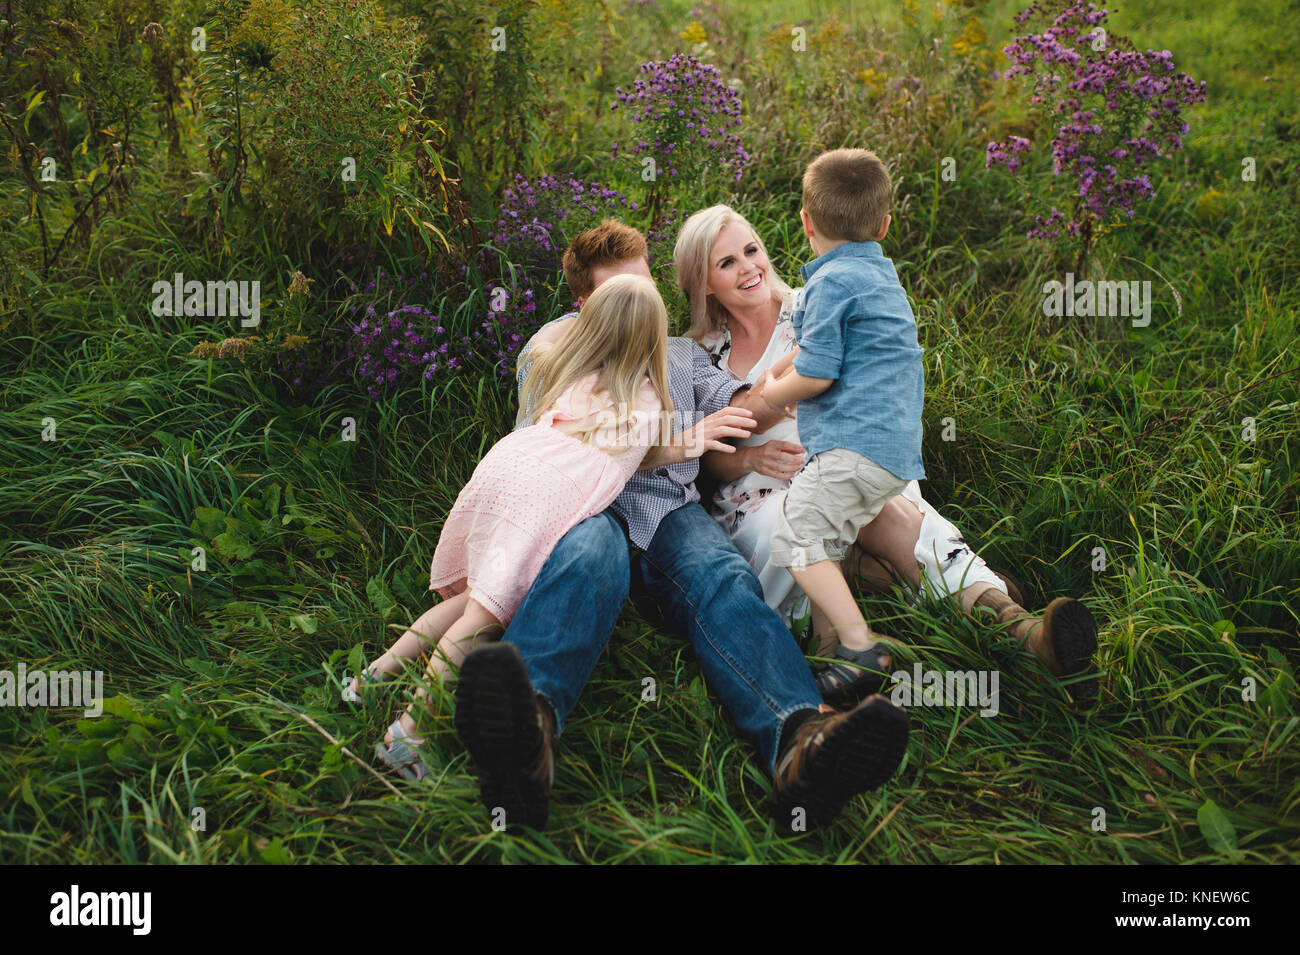 Parents and children lying in tall grass together Stock Photo